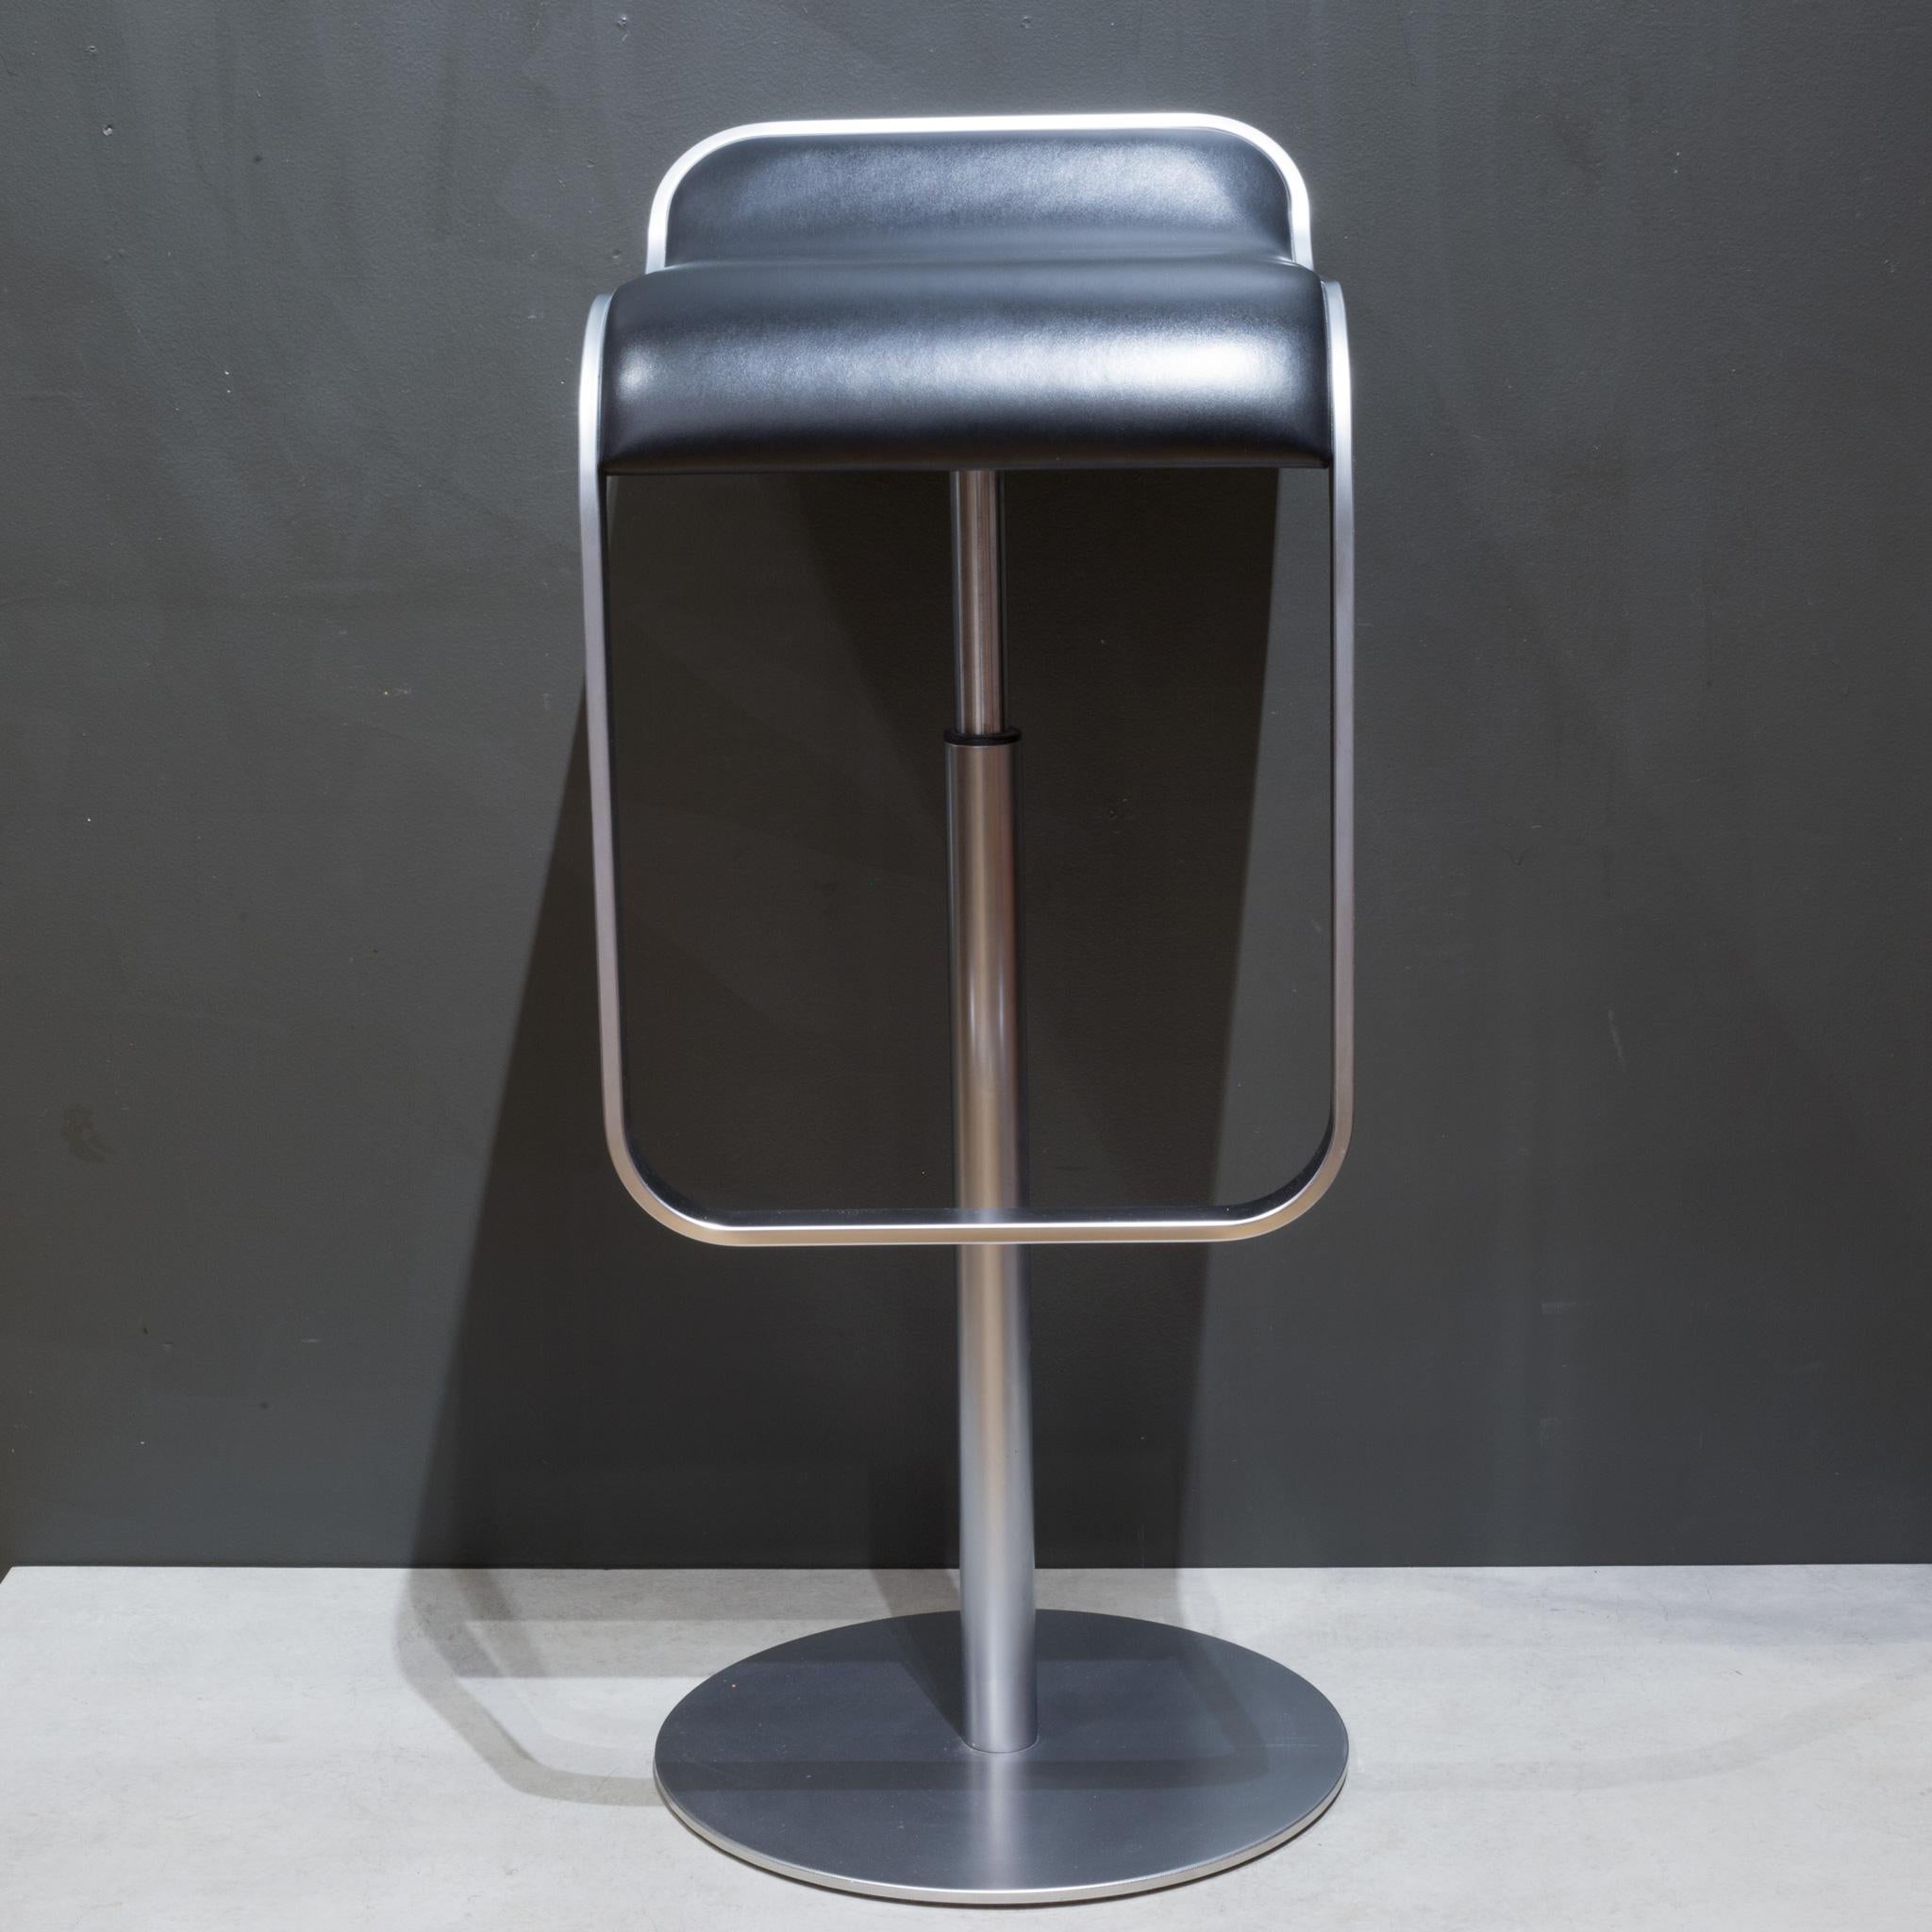 About

Price is per stool.

Comfortable swiveling, height-adjustable stools with durable steel frame and base. Features leather swivel seats and a lever that adjusts the seat height.

 Creator Shin Azumi and Tomoko Azumi. Lapalma. Made in